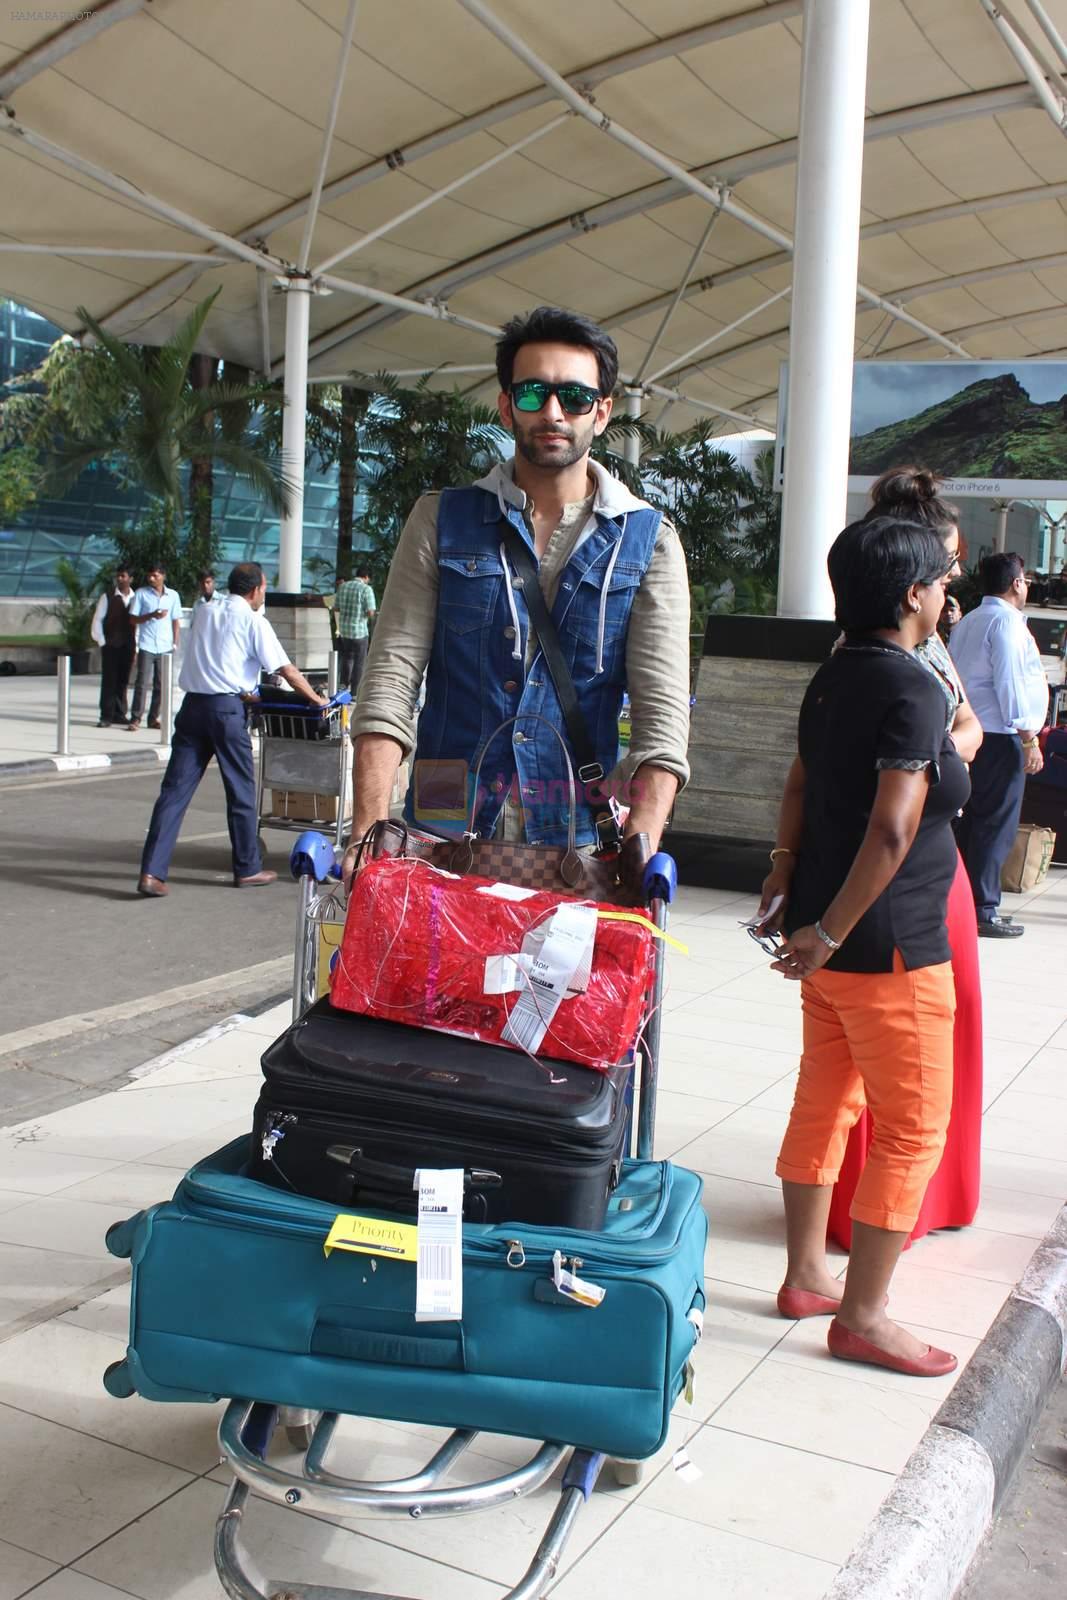 Nandish Sandhu snapped at airport in Mumbai on 26th June 2015